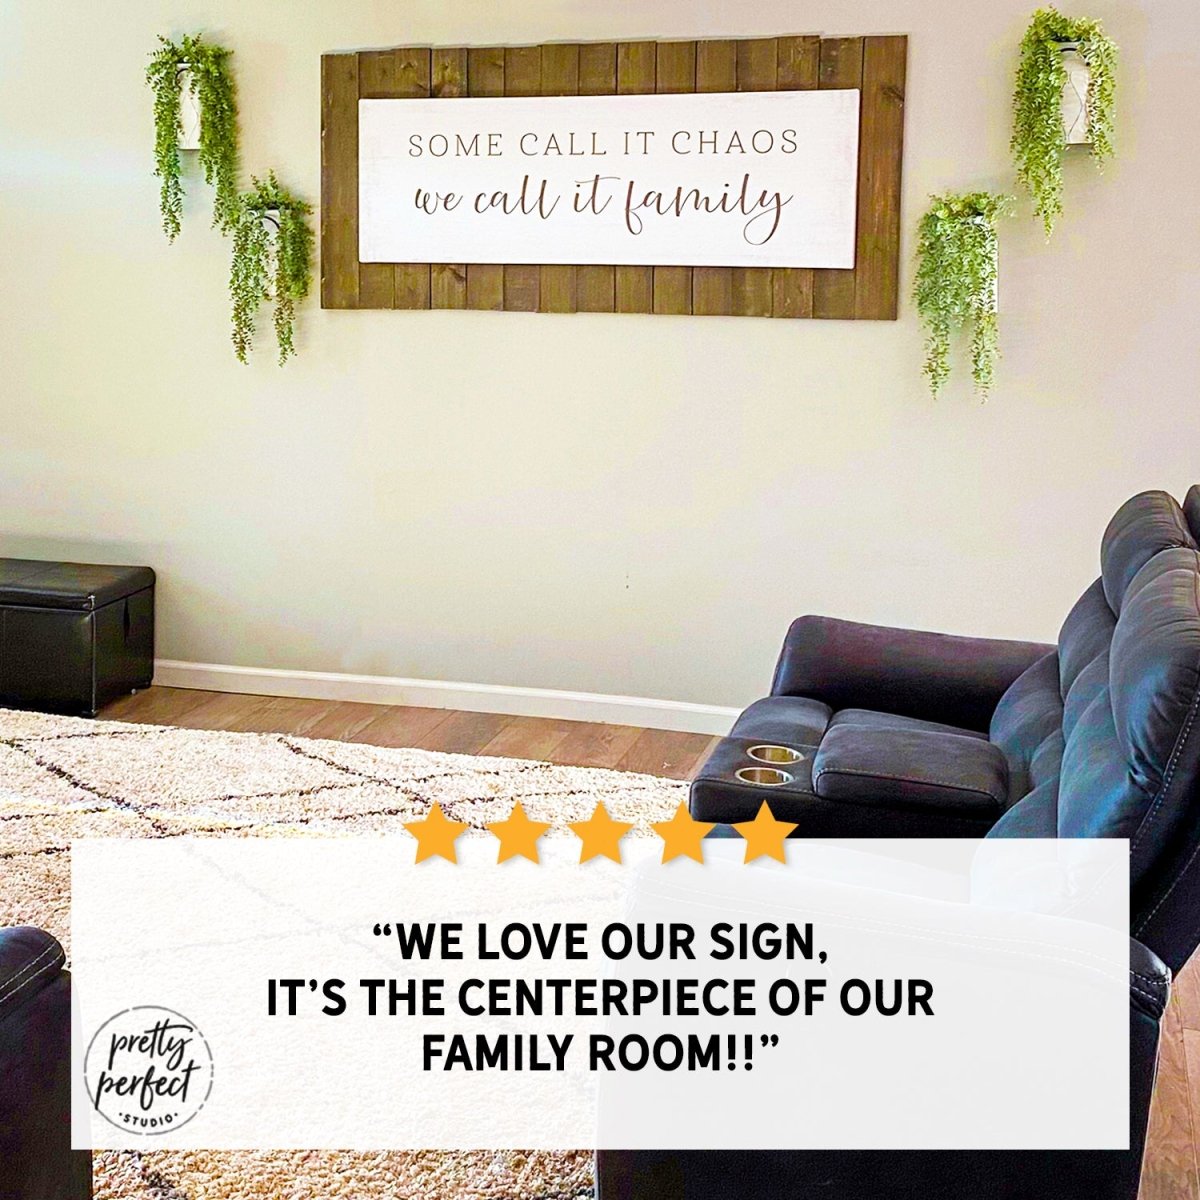 Customer product review for some call it chaos we call it family sign by Pretty Perfect Studio